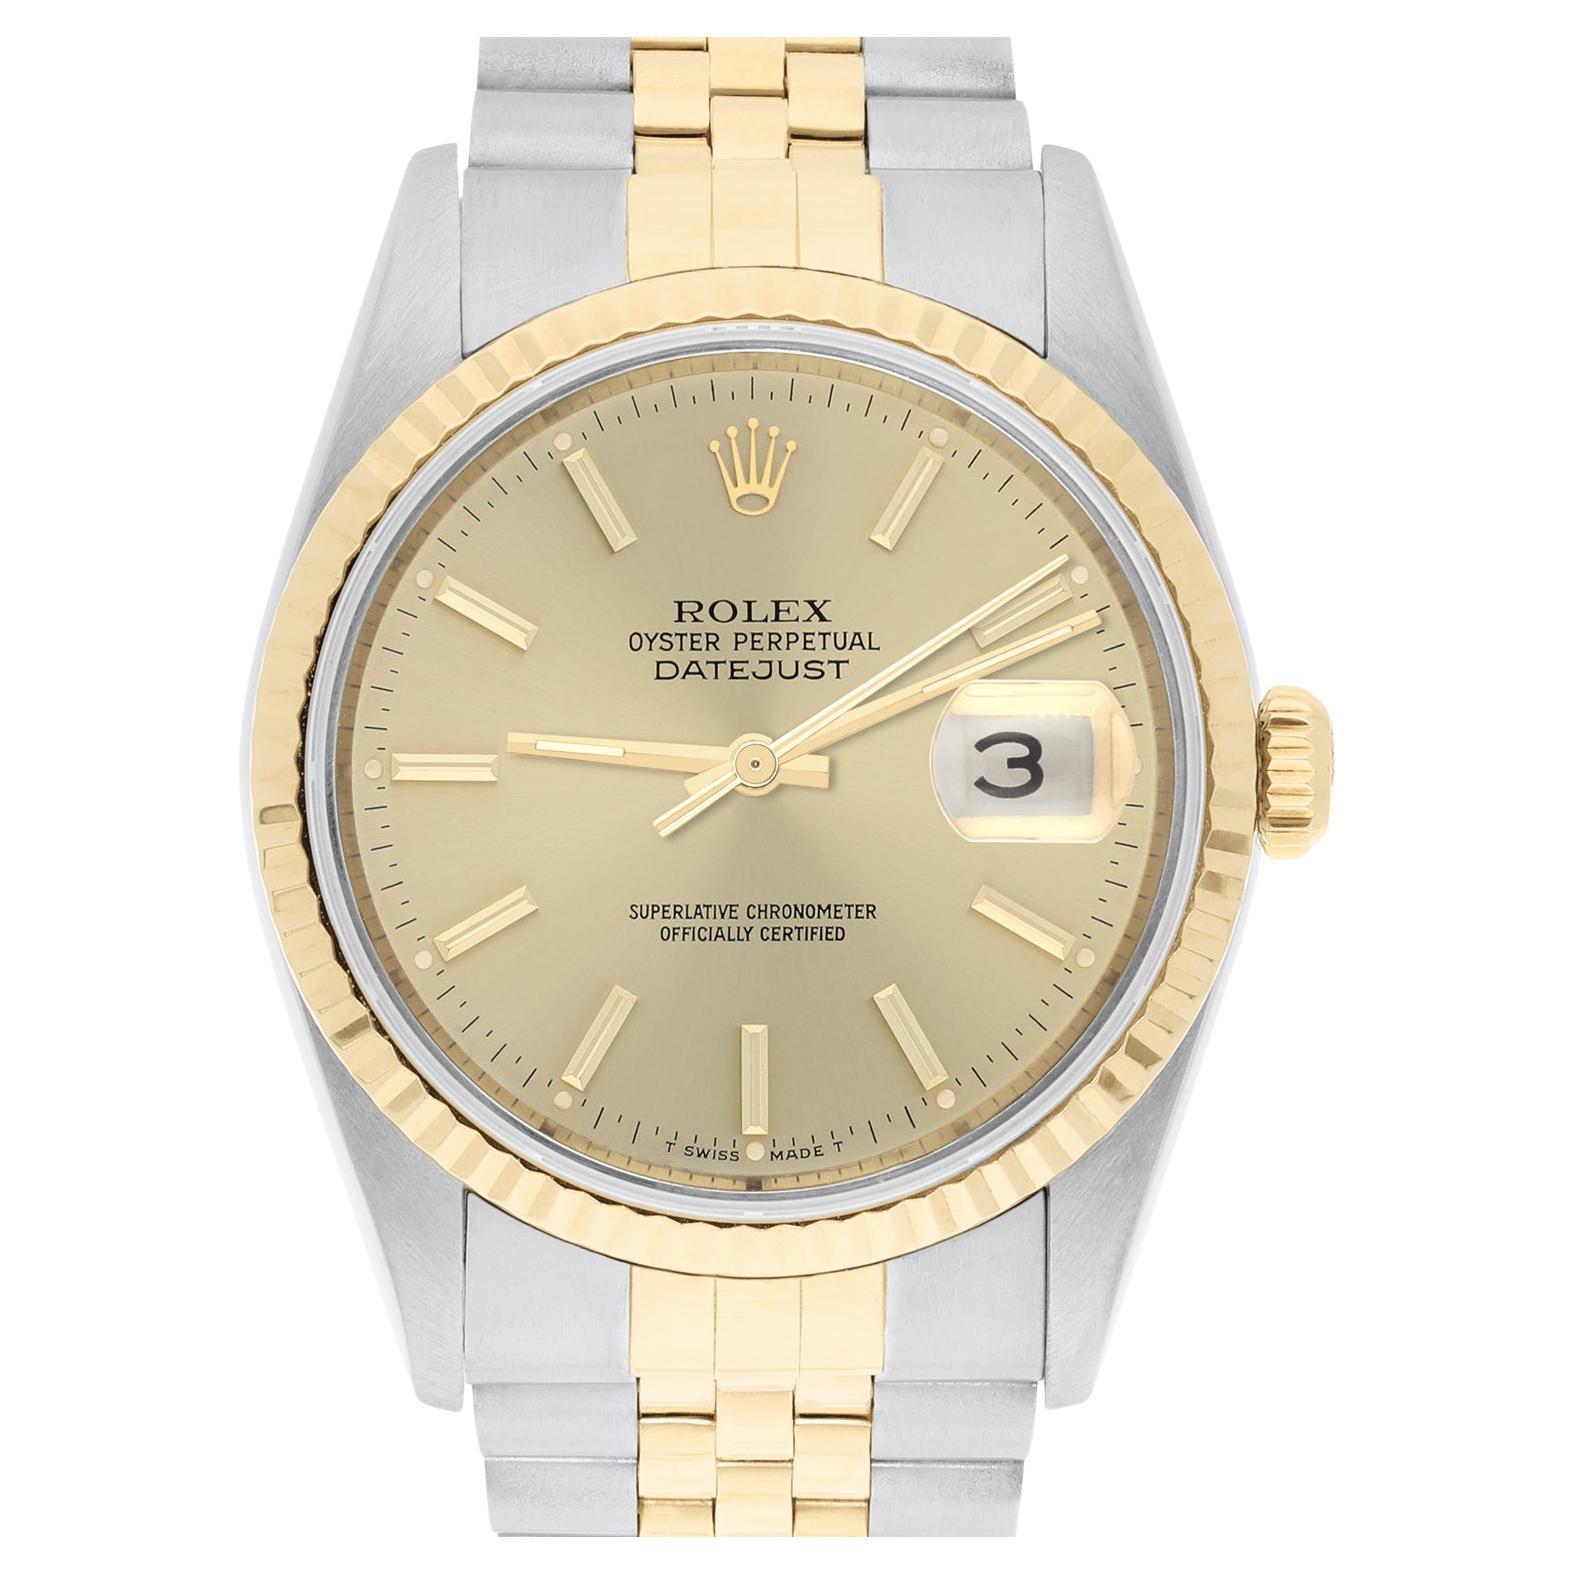 Rolex Datejust 36mm Two Tone Champagne Index Dial Jubilee 16233 Circa 1995 For Sale